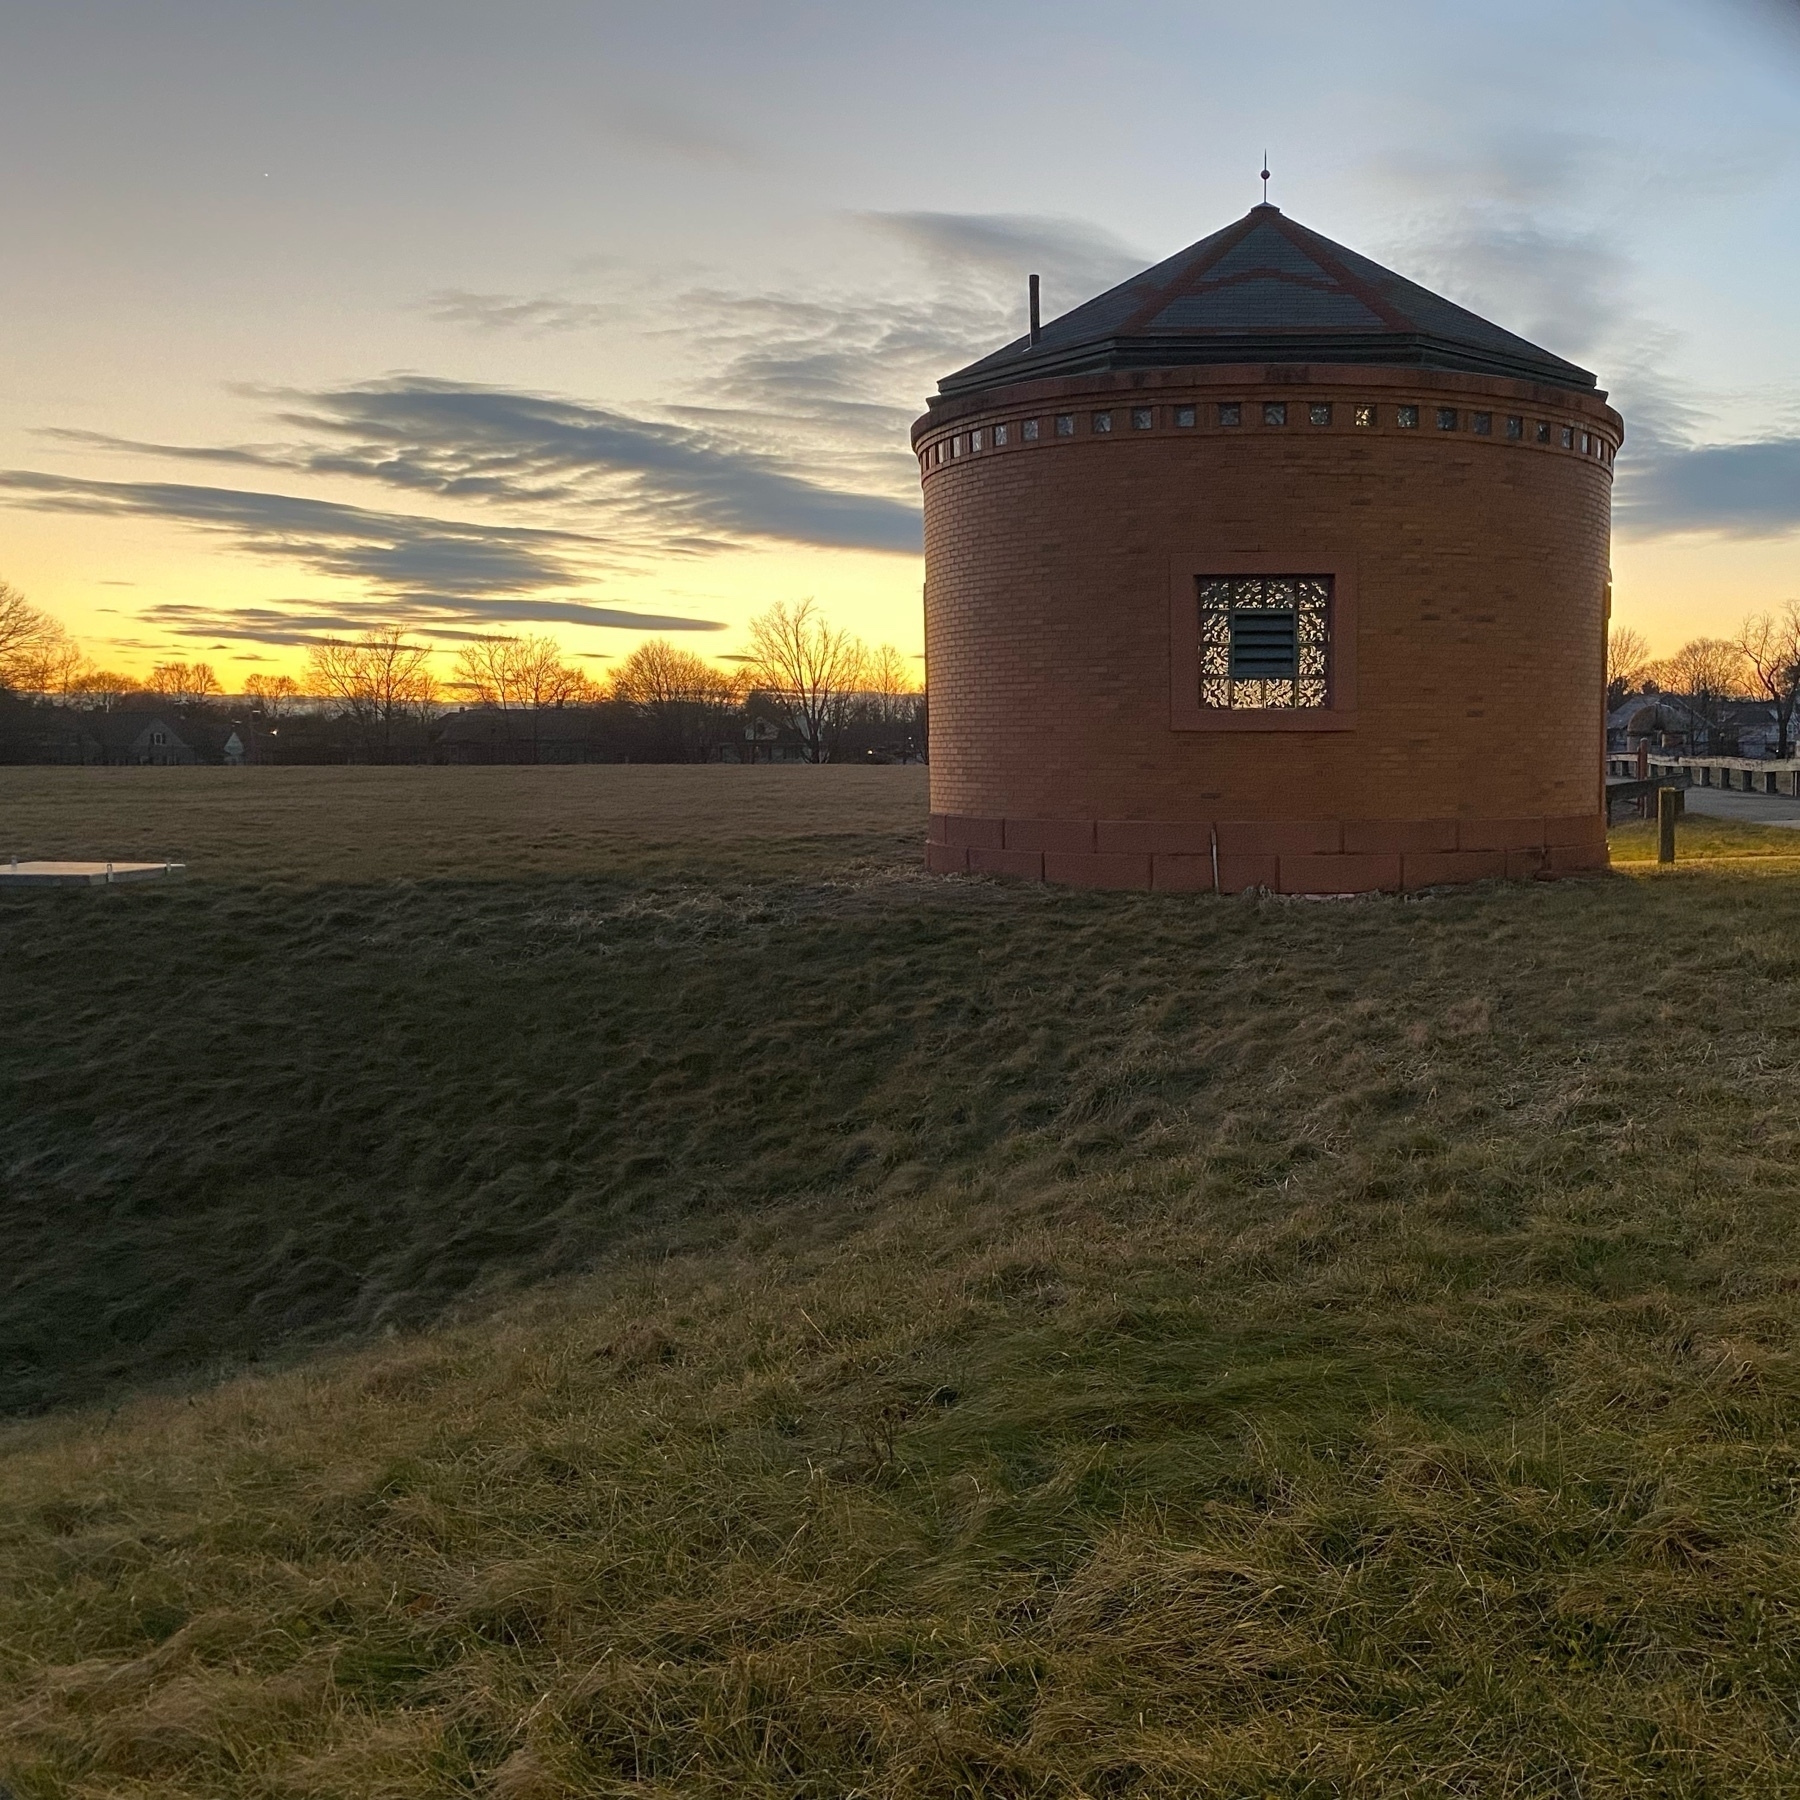 Vies of a small round brick building with an empty field and sunset behind it.